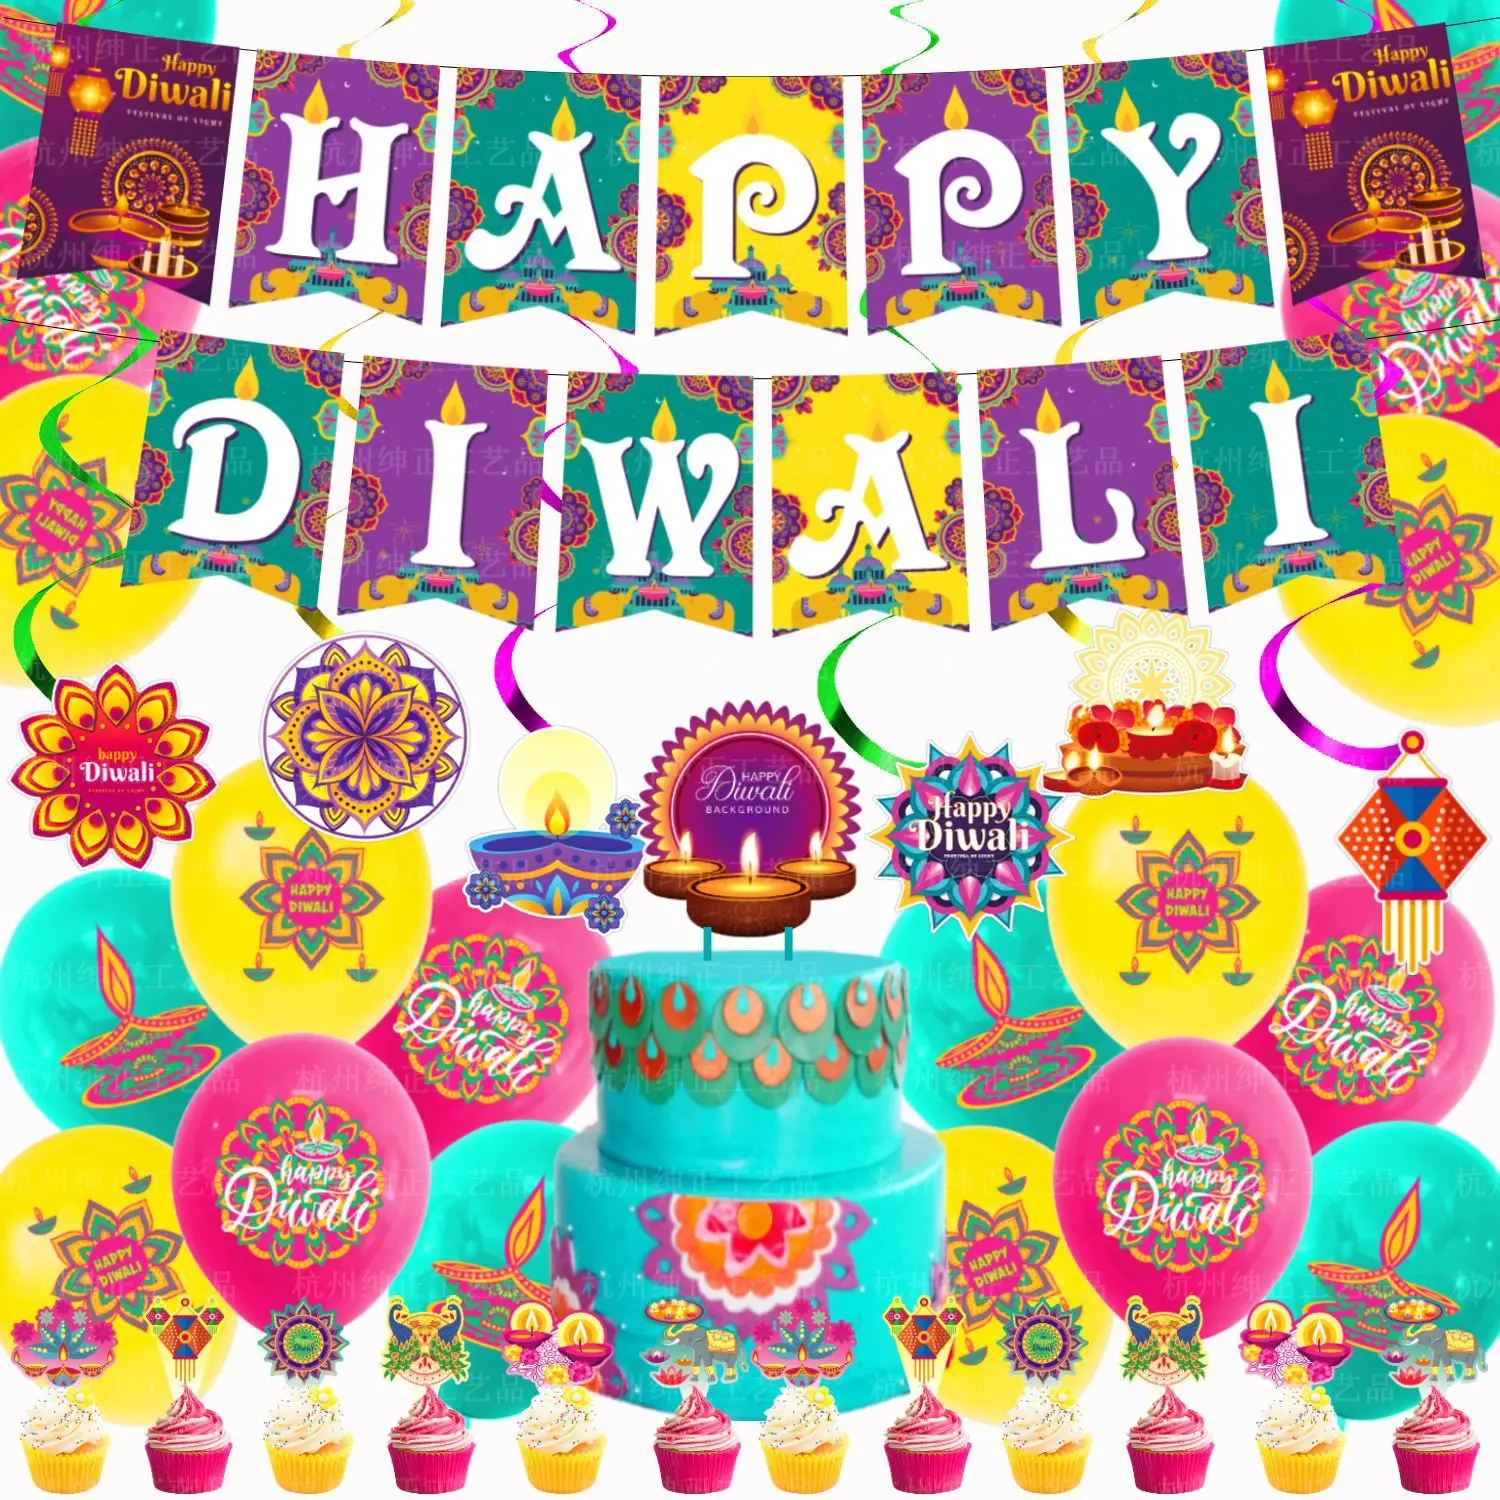 

DAMAI Indian Diwali Festival Party Decoration Set Happy Diwali Banner Latex Balloons Cake Toppers Party Supplies